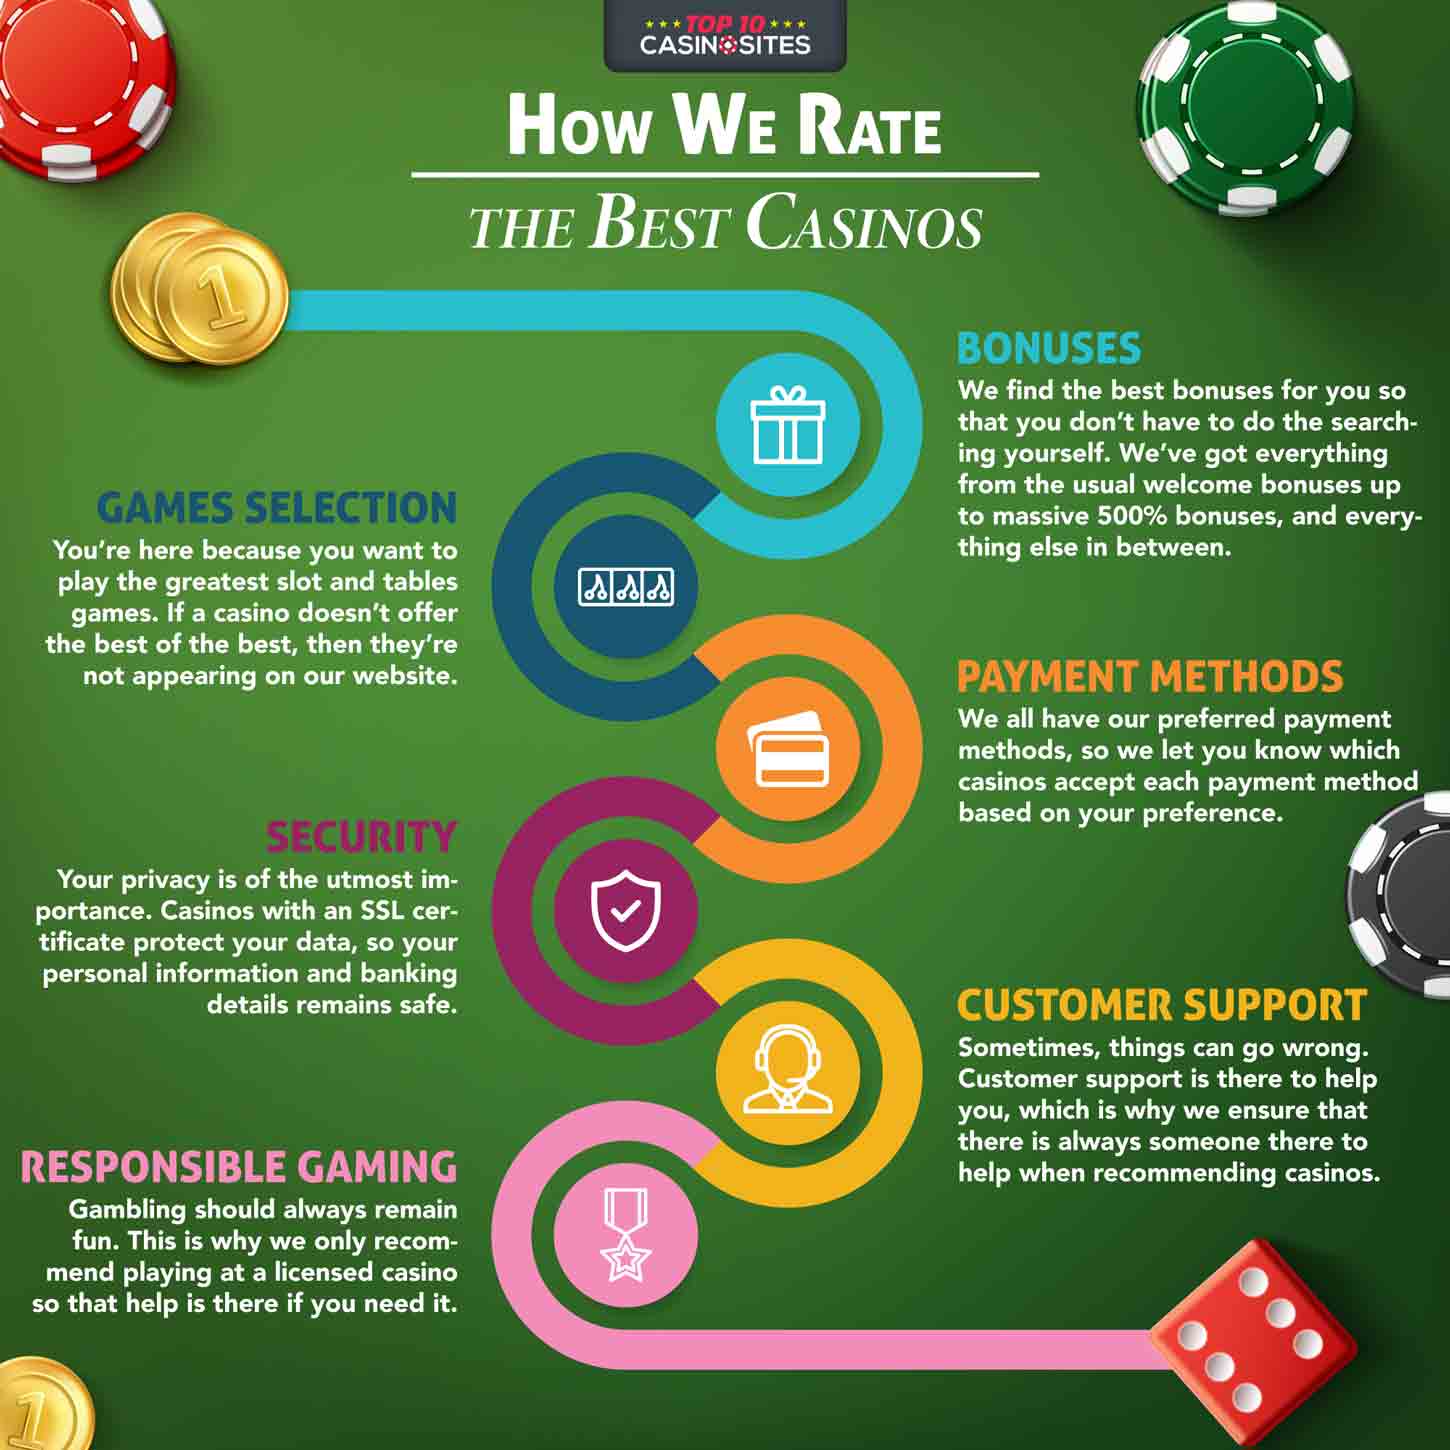 An infographic to outline how this website rates its best casinos. 